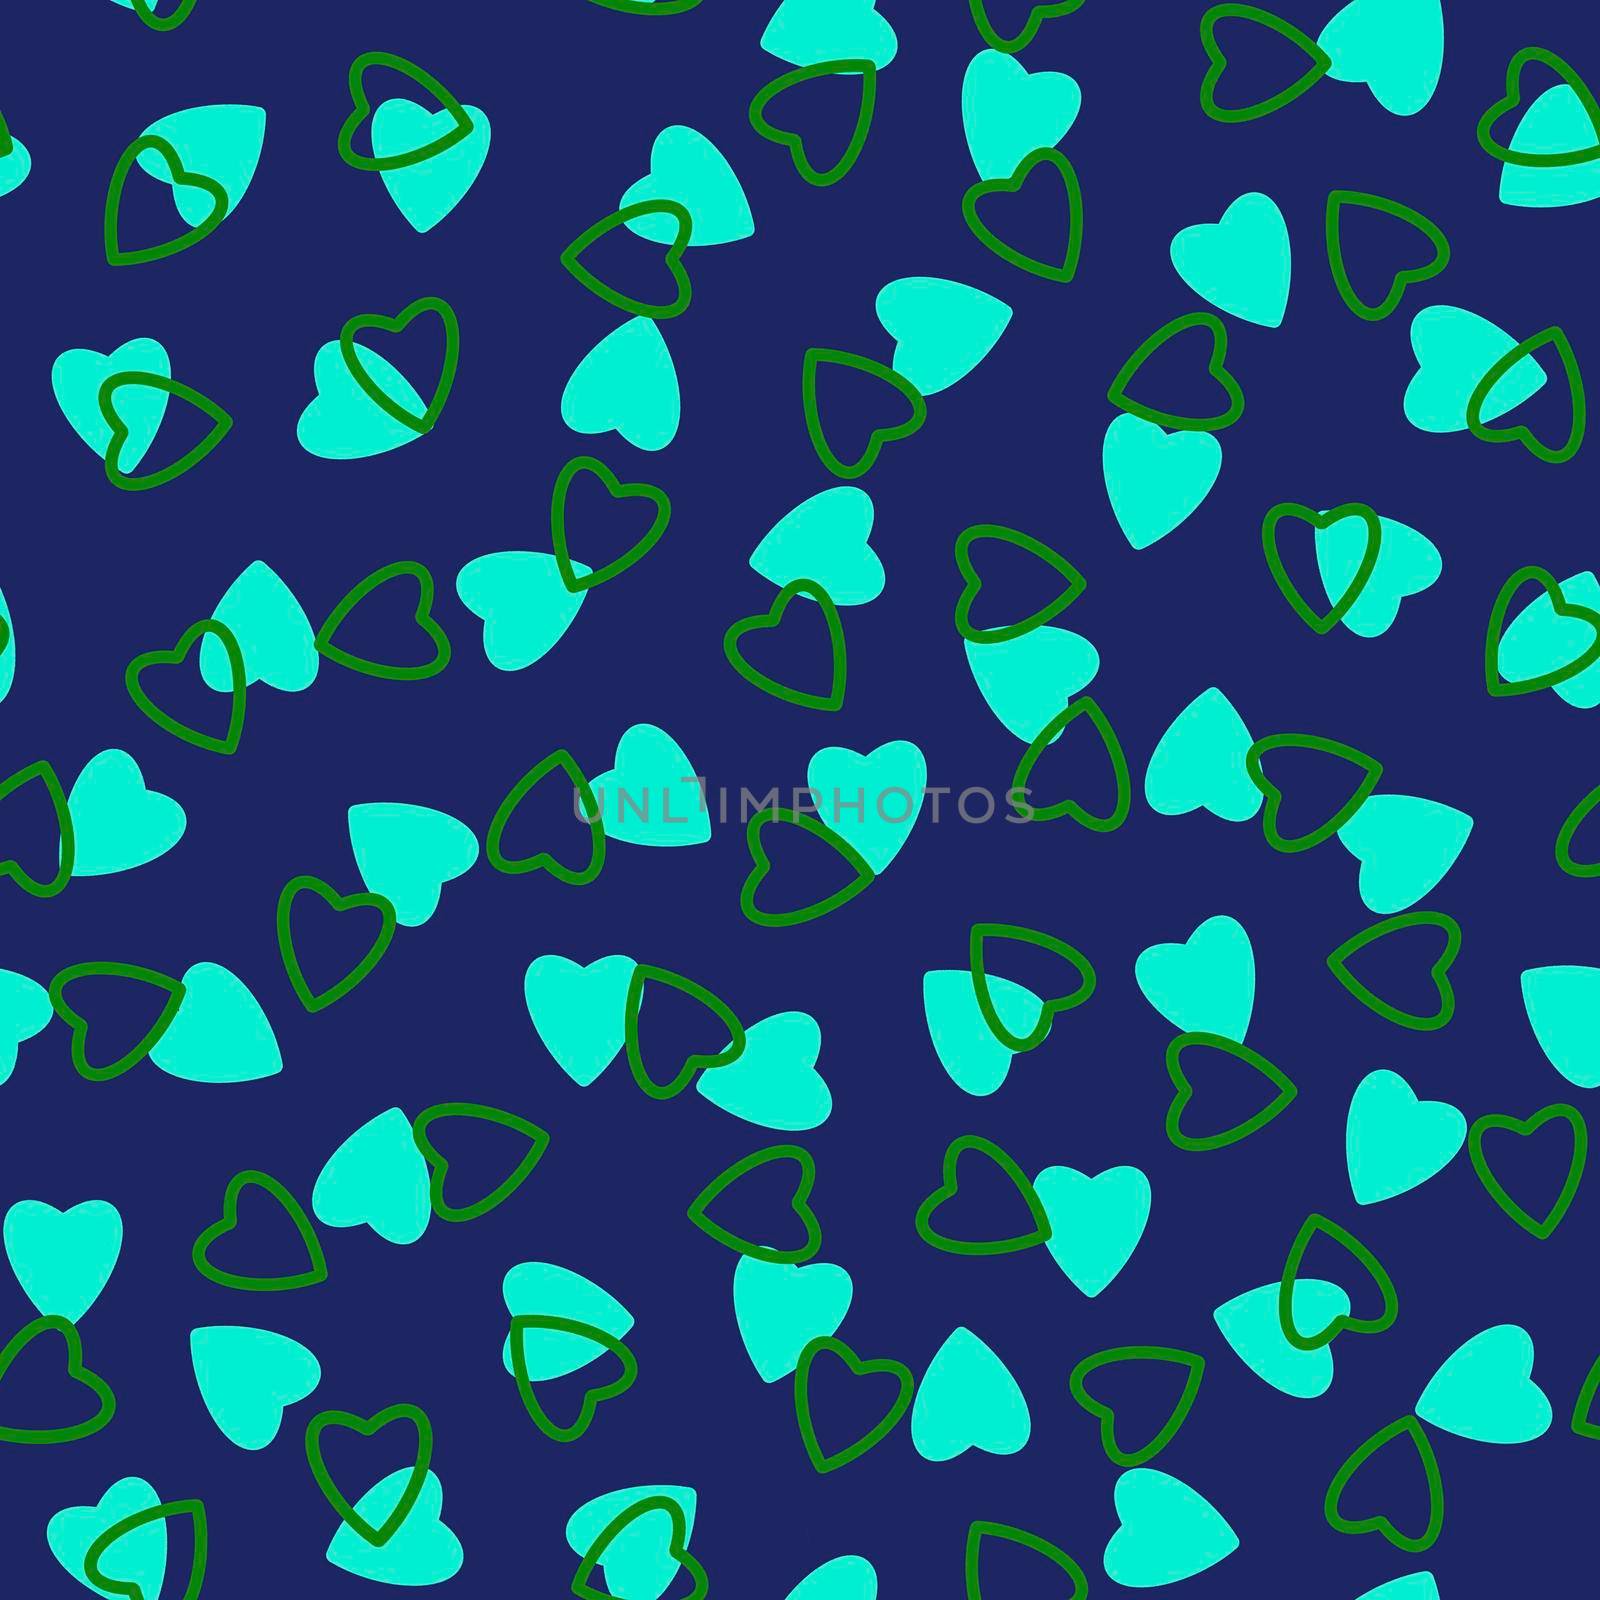 Simple heart seamless pattern,endless chaotic texture made of tiny heart silhouettes.Valentines,mothers day background.Great for Easter,wedding,scrapbook,gift wrapping paper,textiles.Azure,green,blue.